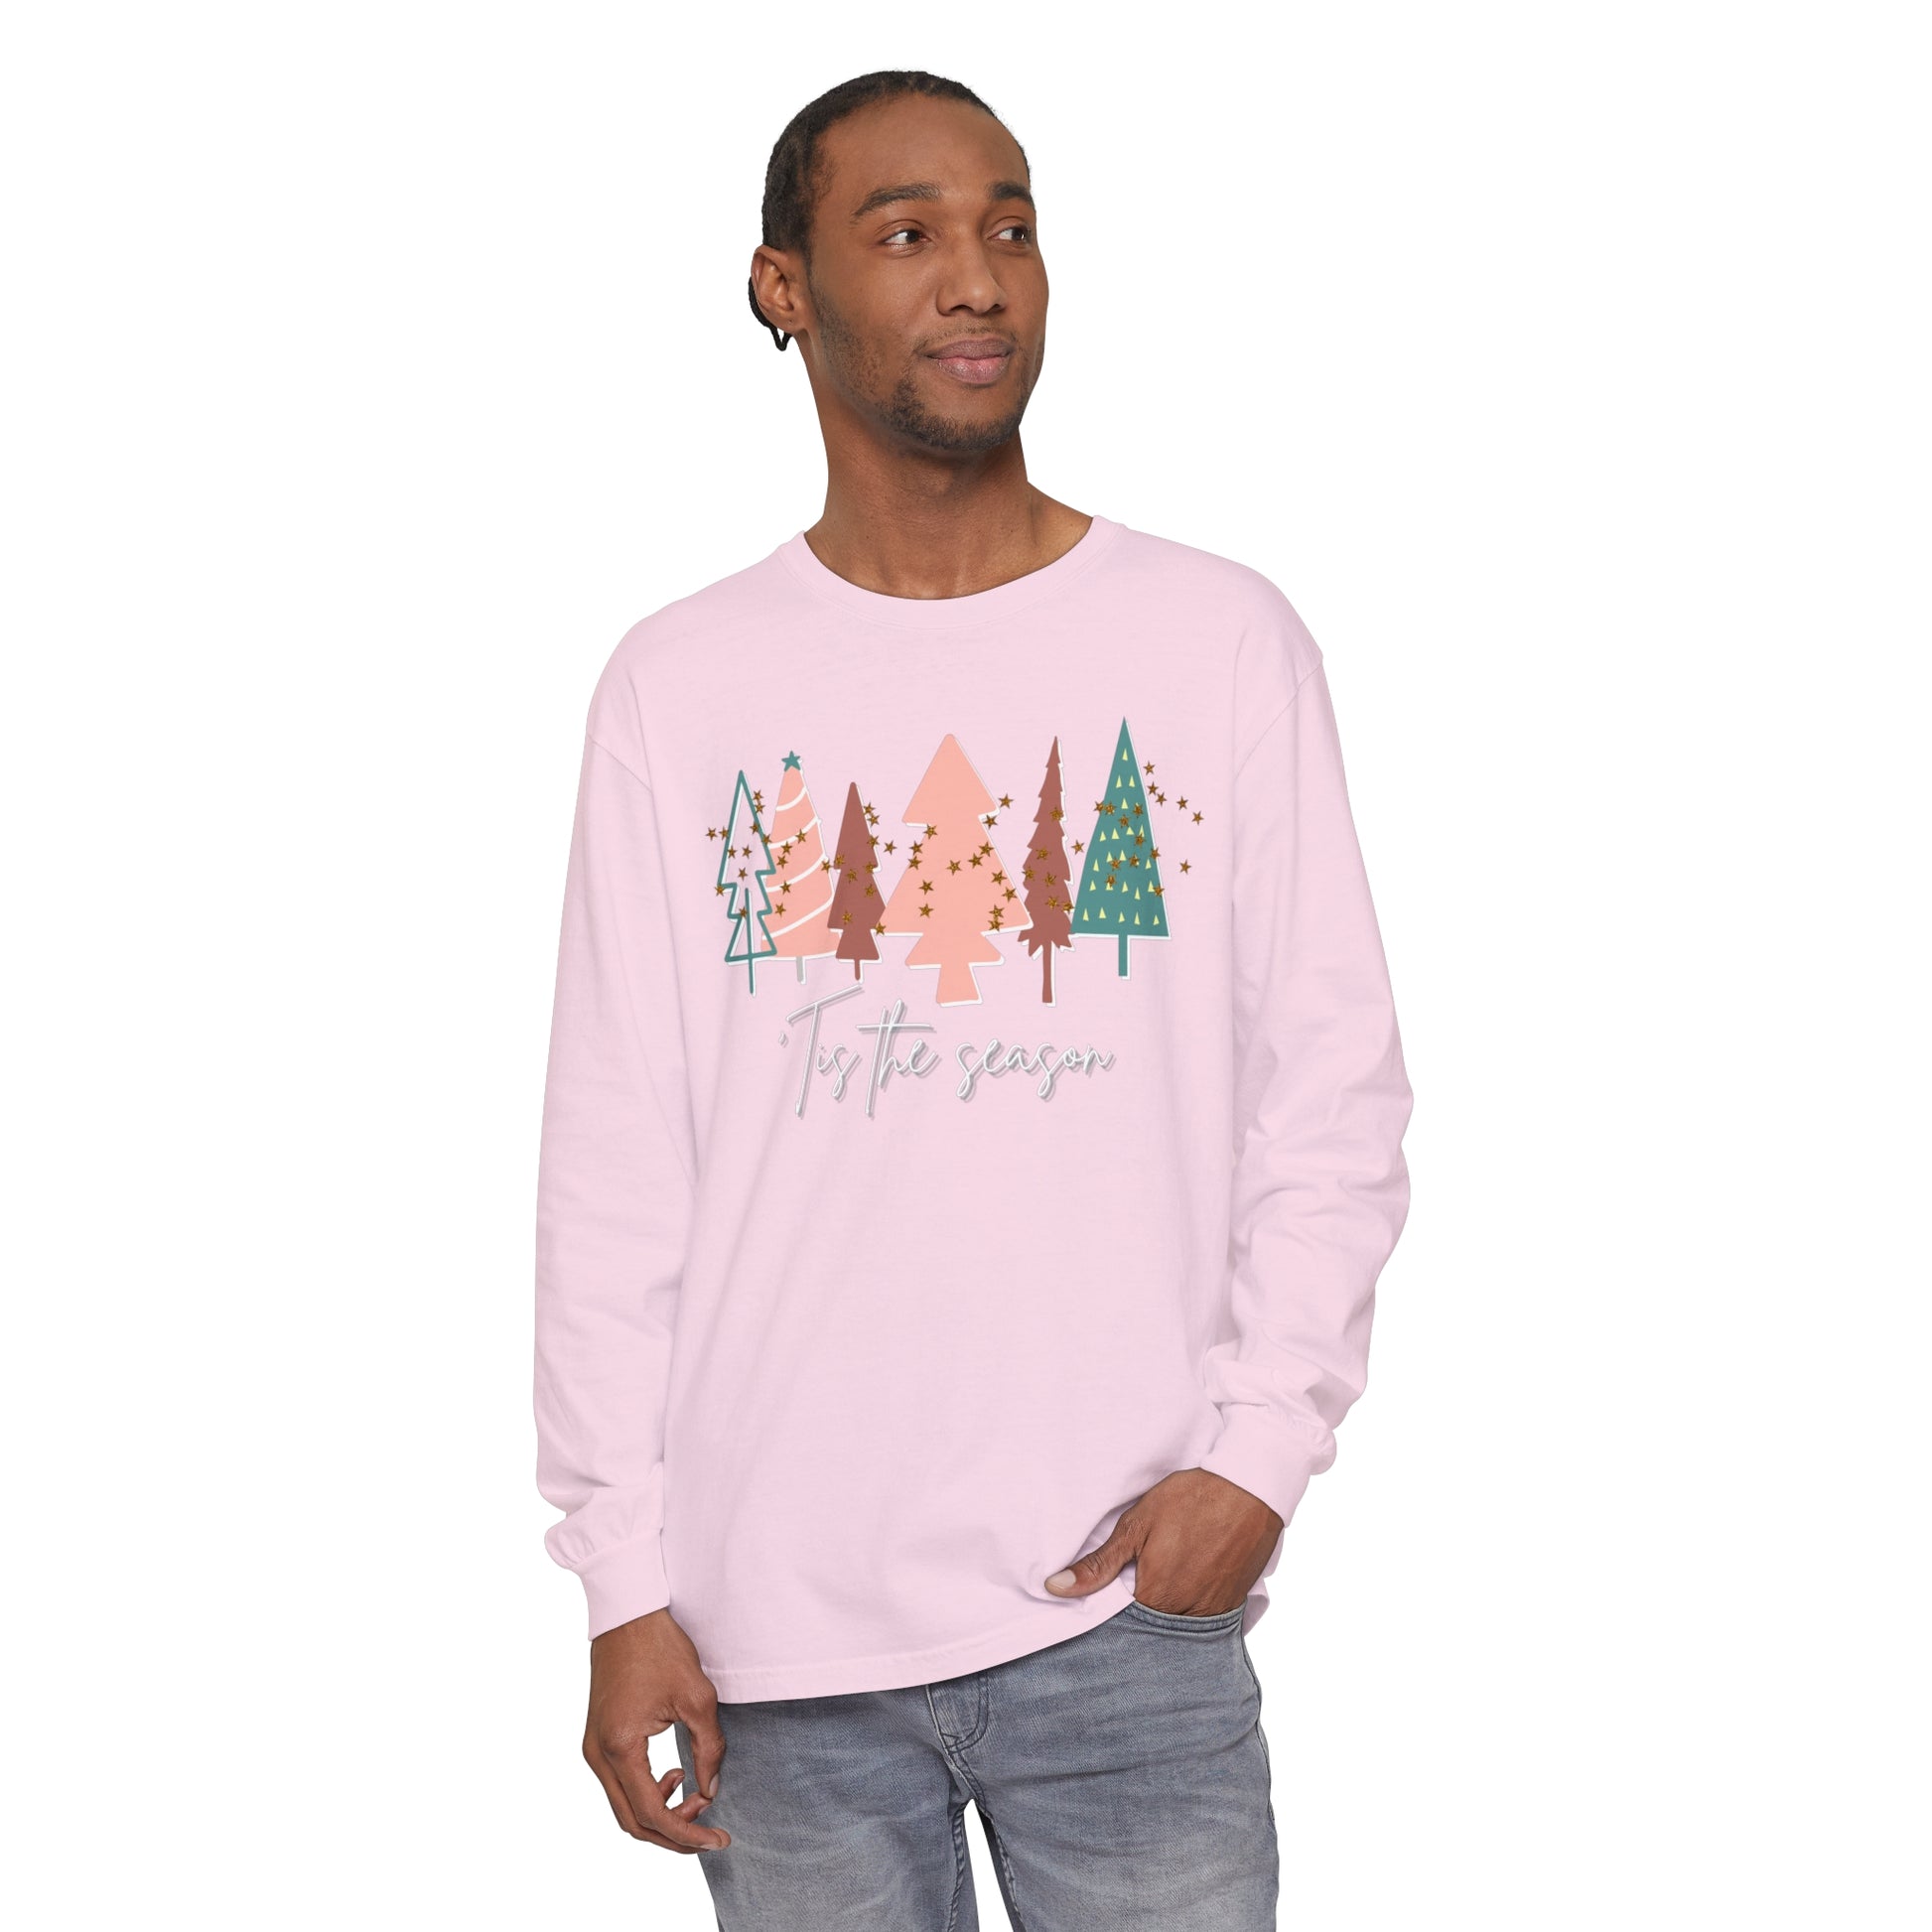 A man wearing a Tis the Season Christmas Tree Shirt by Comfort Colors, showcasing comfort and style in his winter wardrobe.